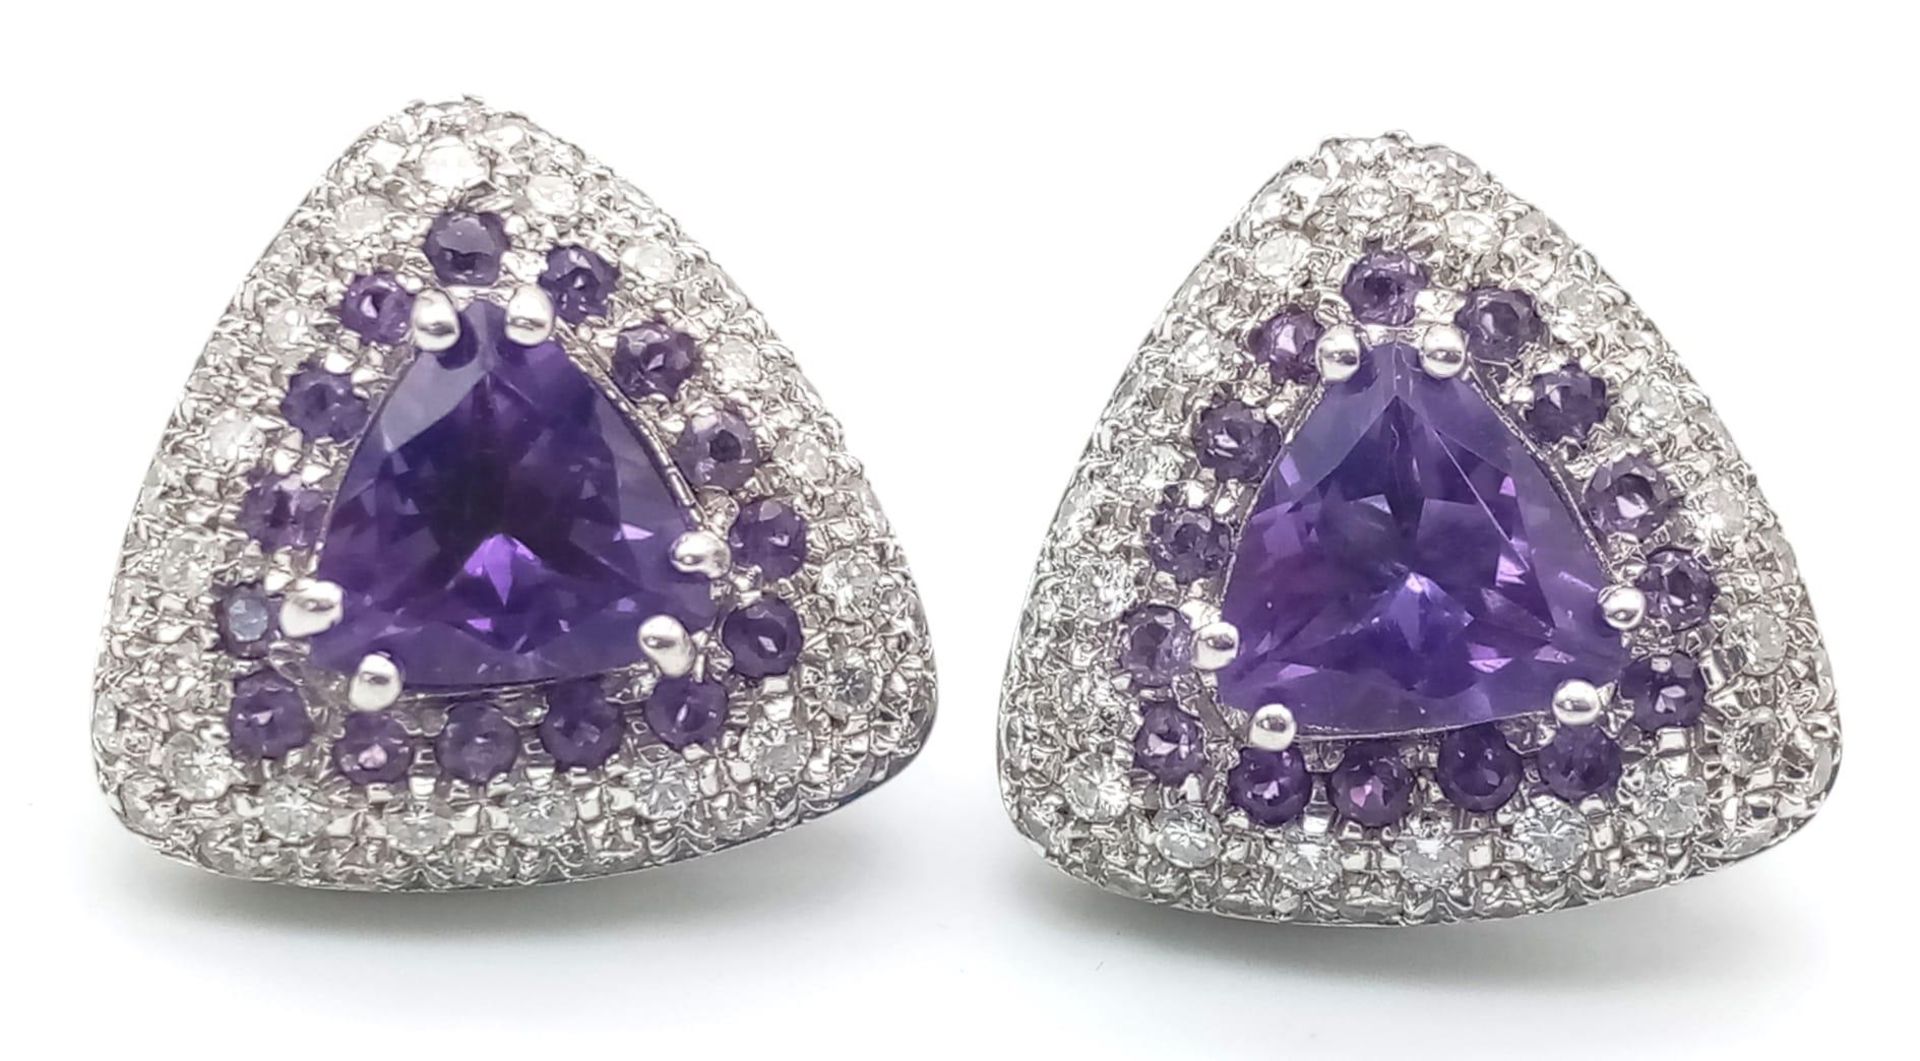 A FABULOUS 18K WHITE GOLD DIAMOND AND AMETHYST RING WITH MATCHING EARRINGS . 35.5gms - Image 8 of 12